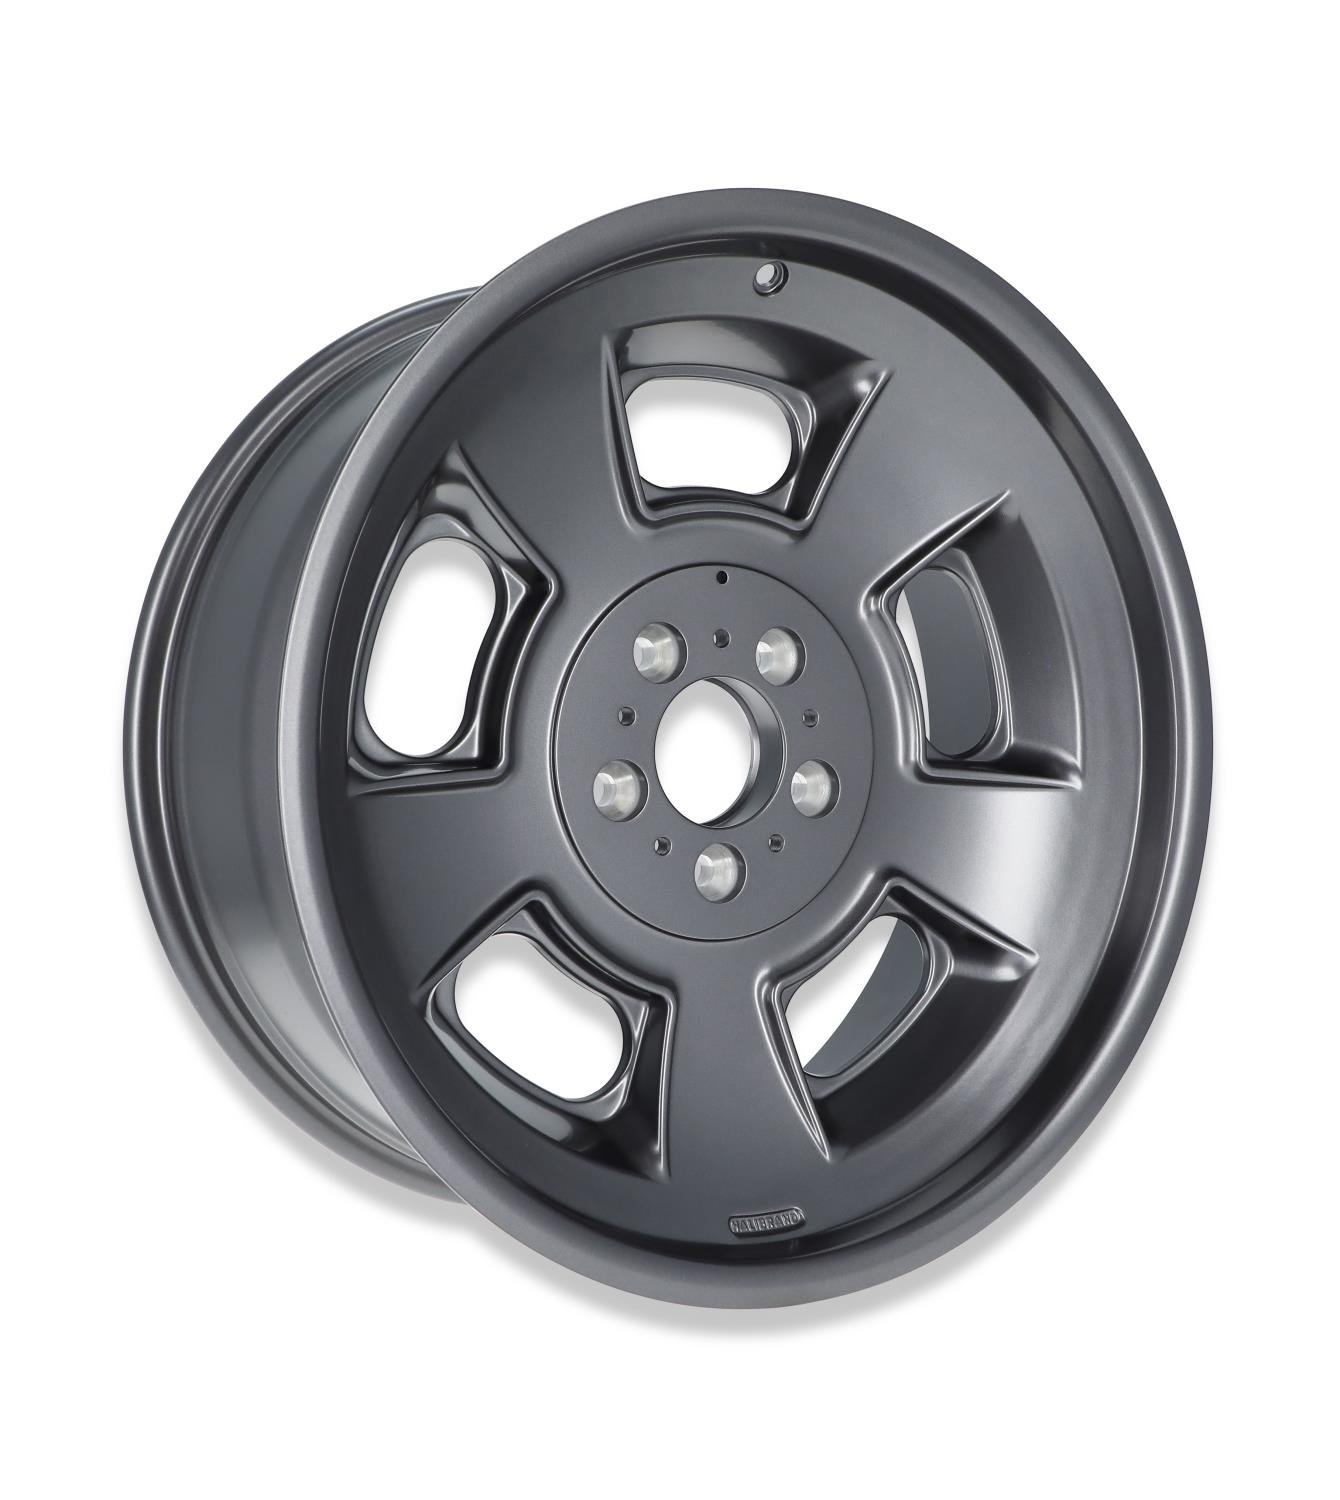 Sprint Front Wheel, Size: 20x8.5", Bolt Pattern: 5x5", Backspace: 4.75", Anthracite - Semi Gloss Clearcoat